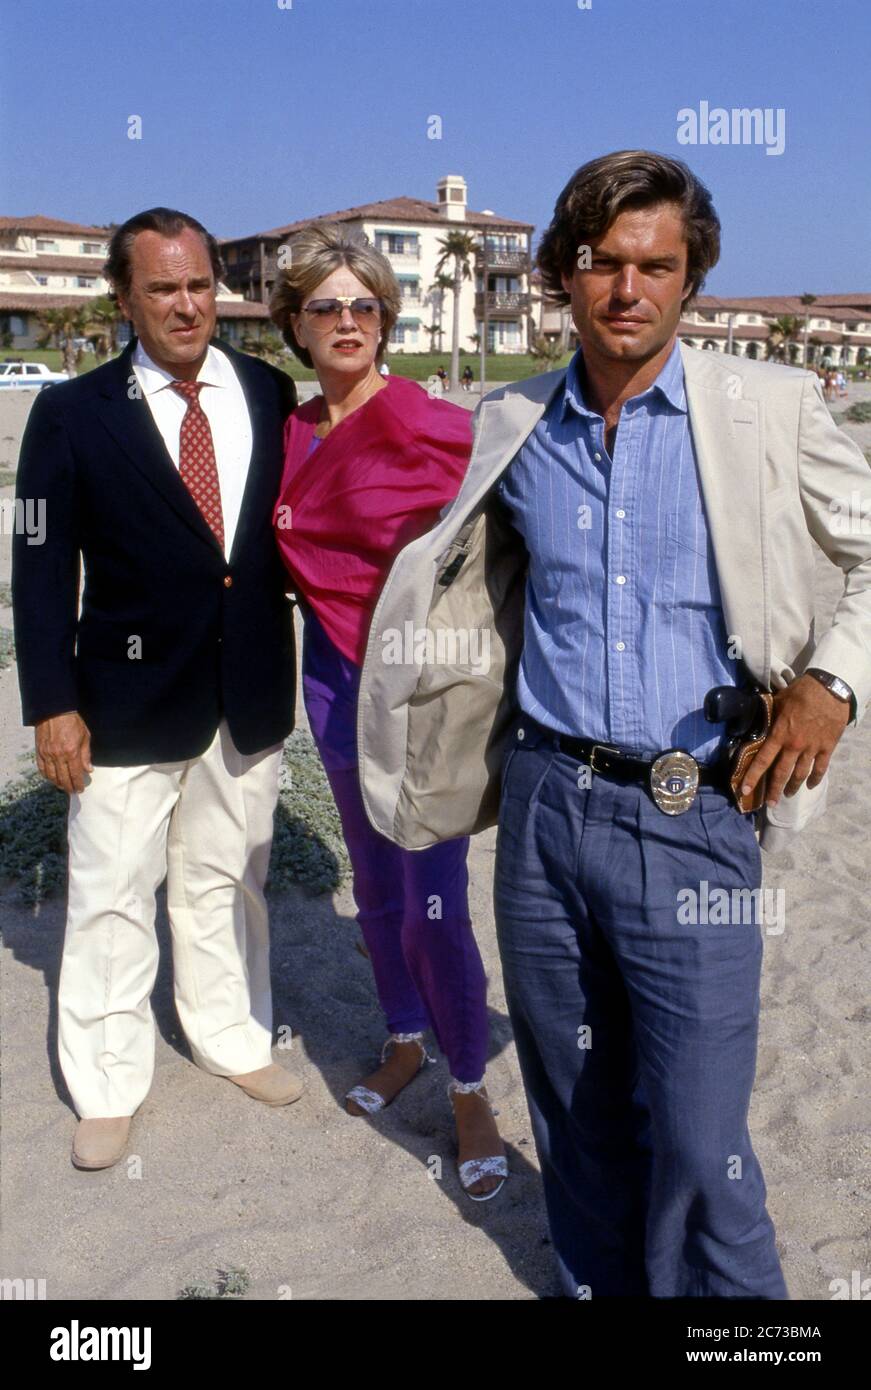 Actors Harry Hamlin, Rip Torn, and Ann Francis pose for a photo while filming on the movie Laguna Heat in the 1980s. Stock Photo